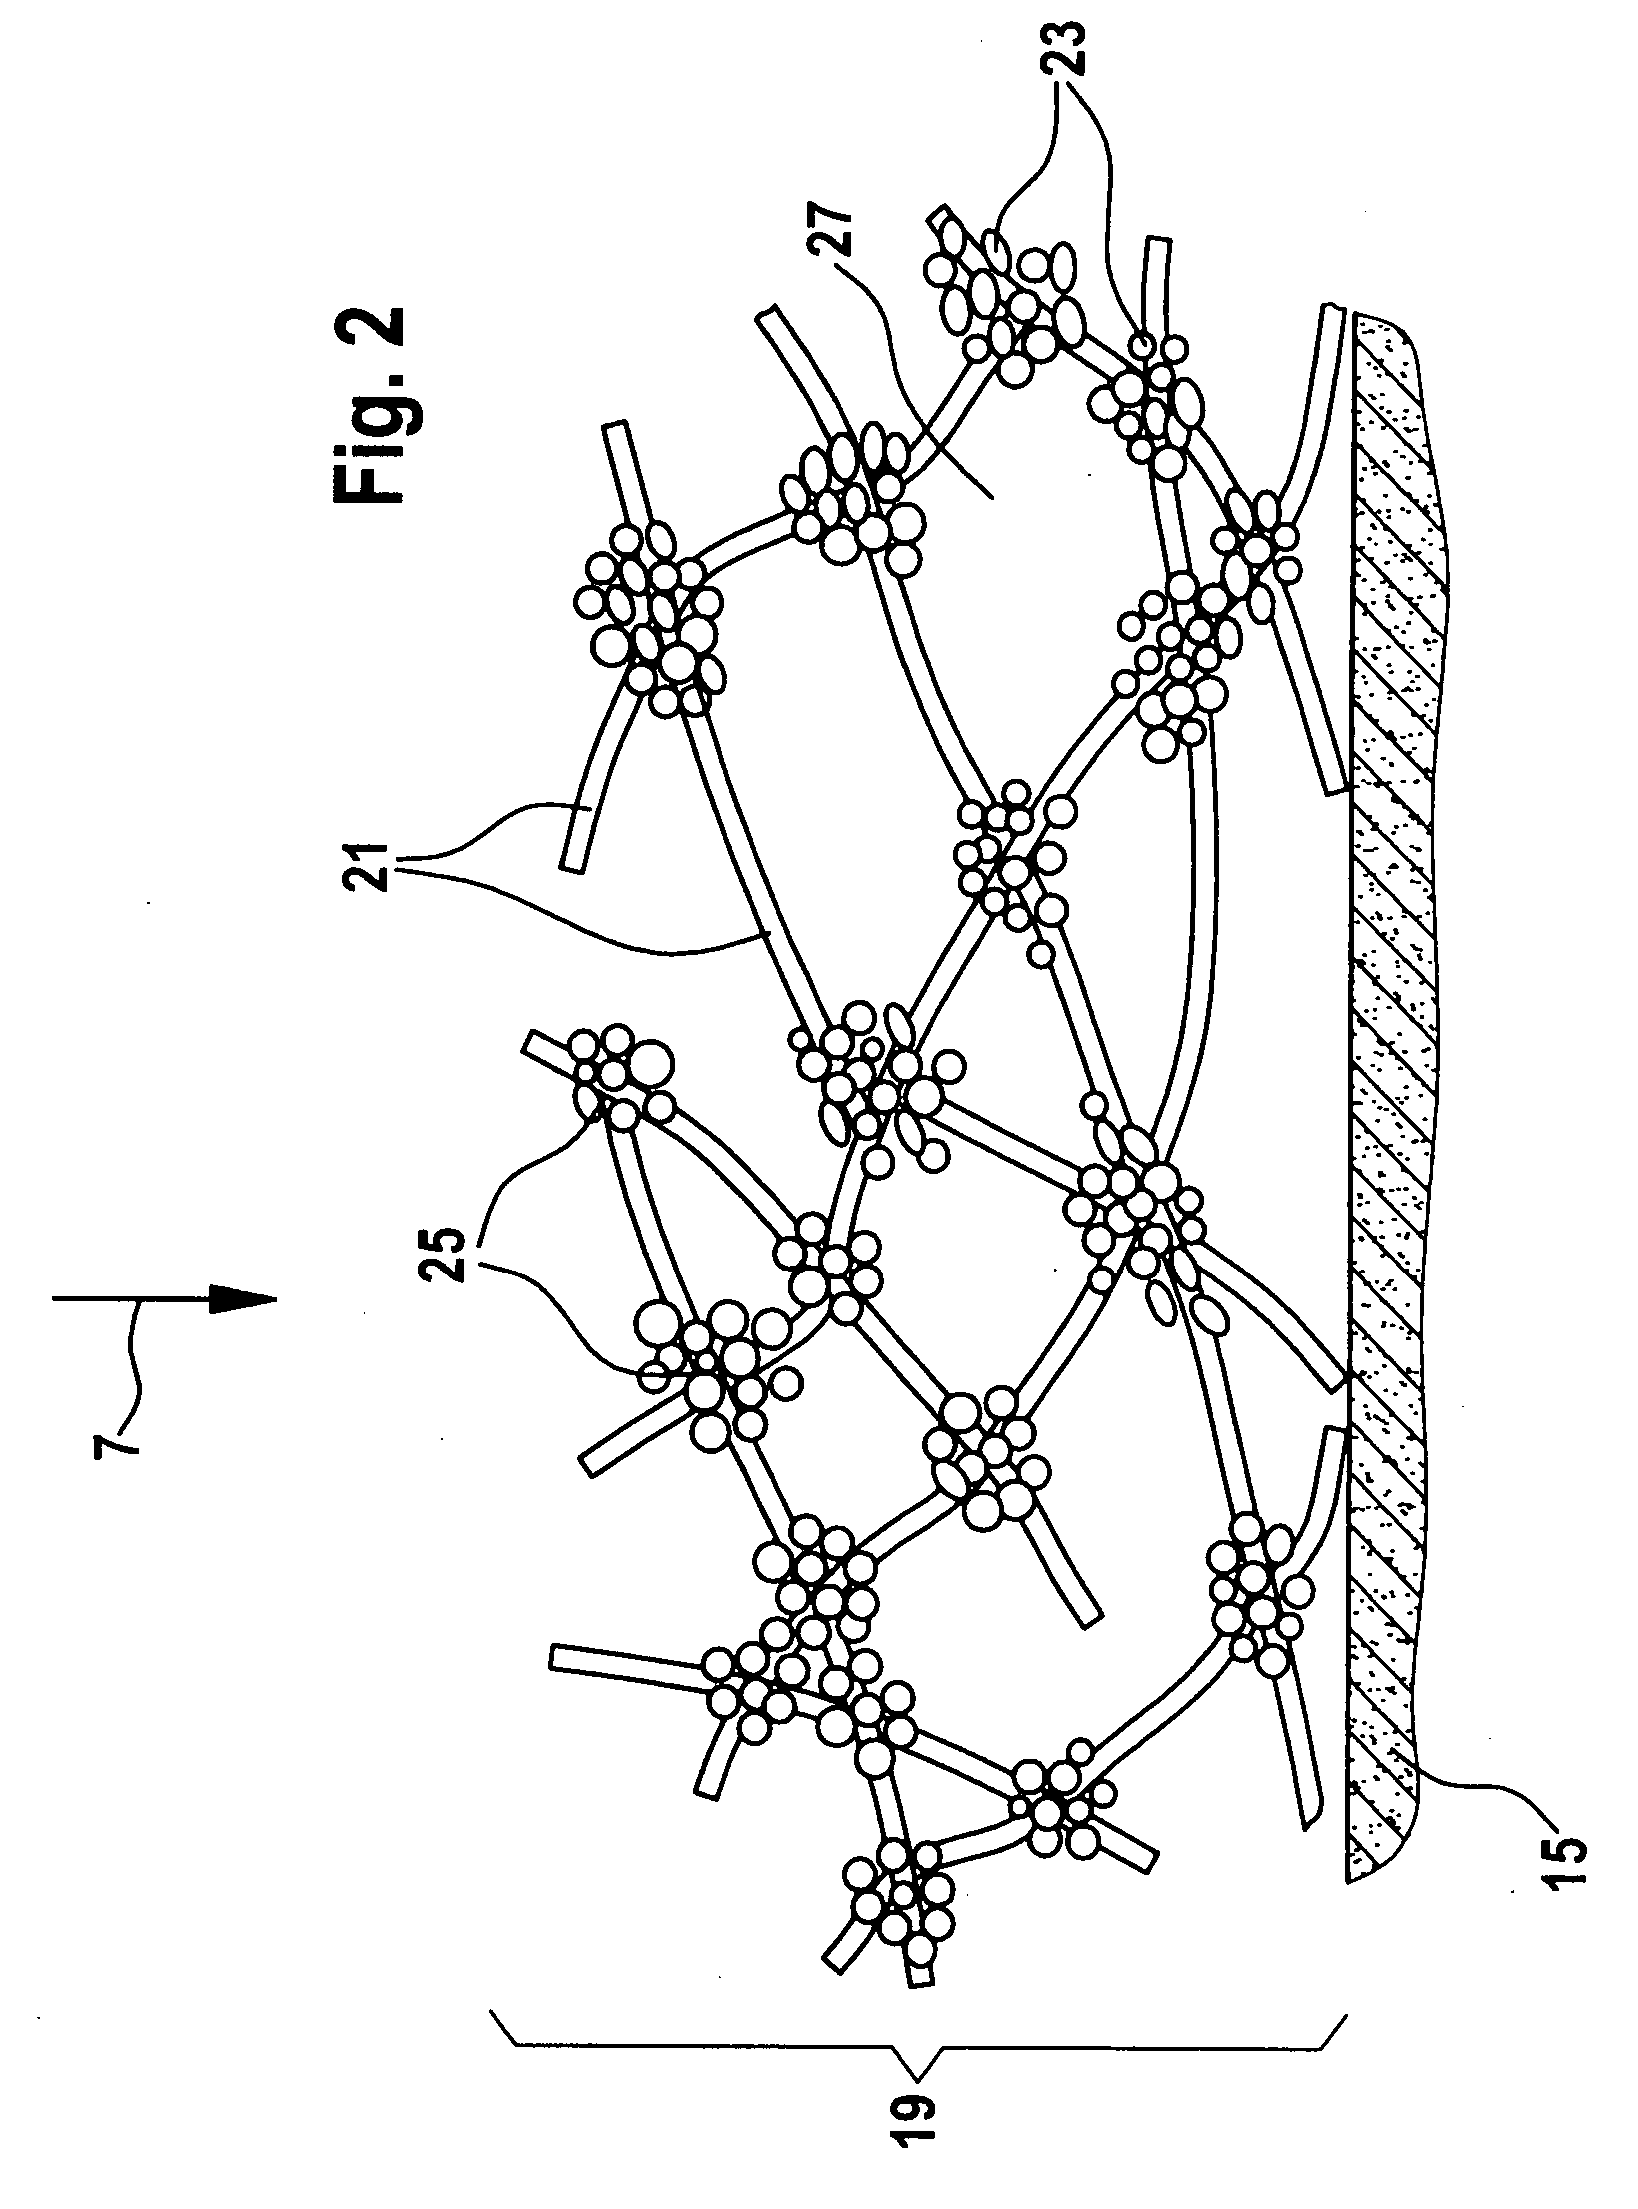 Filter for purifying gas mixtures and method for its manufacture